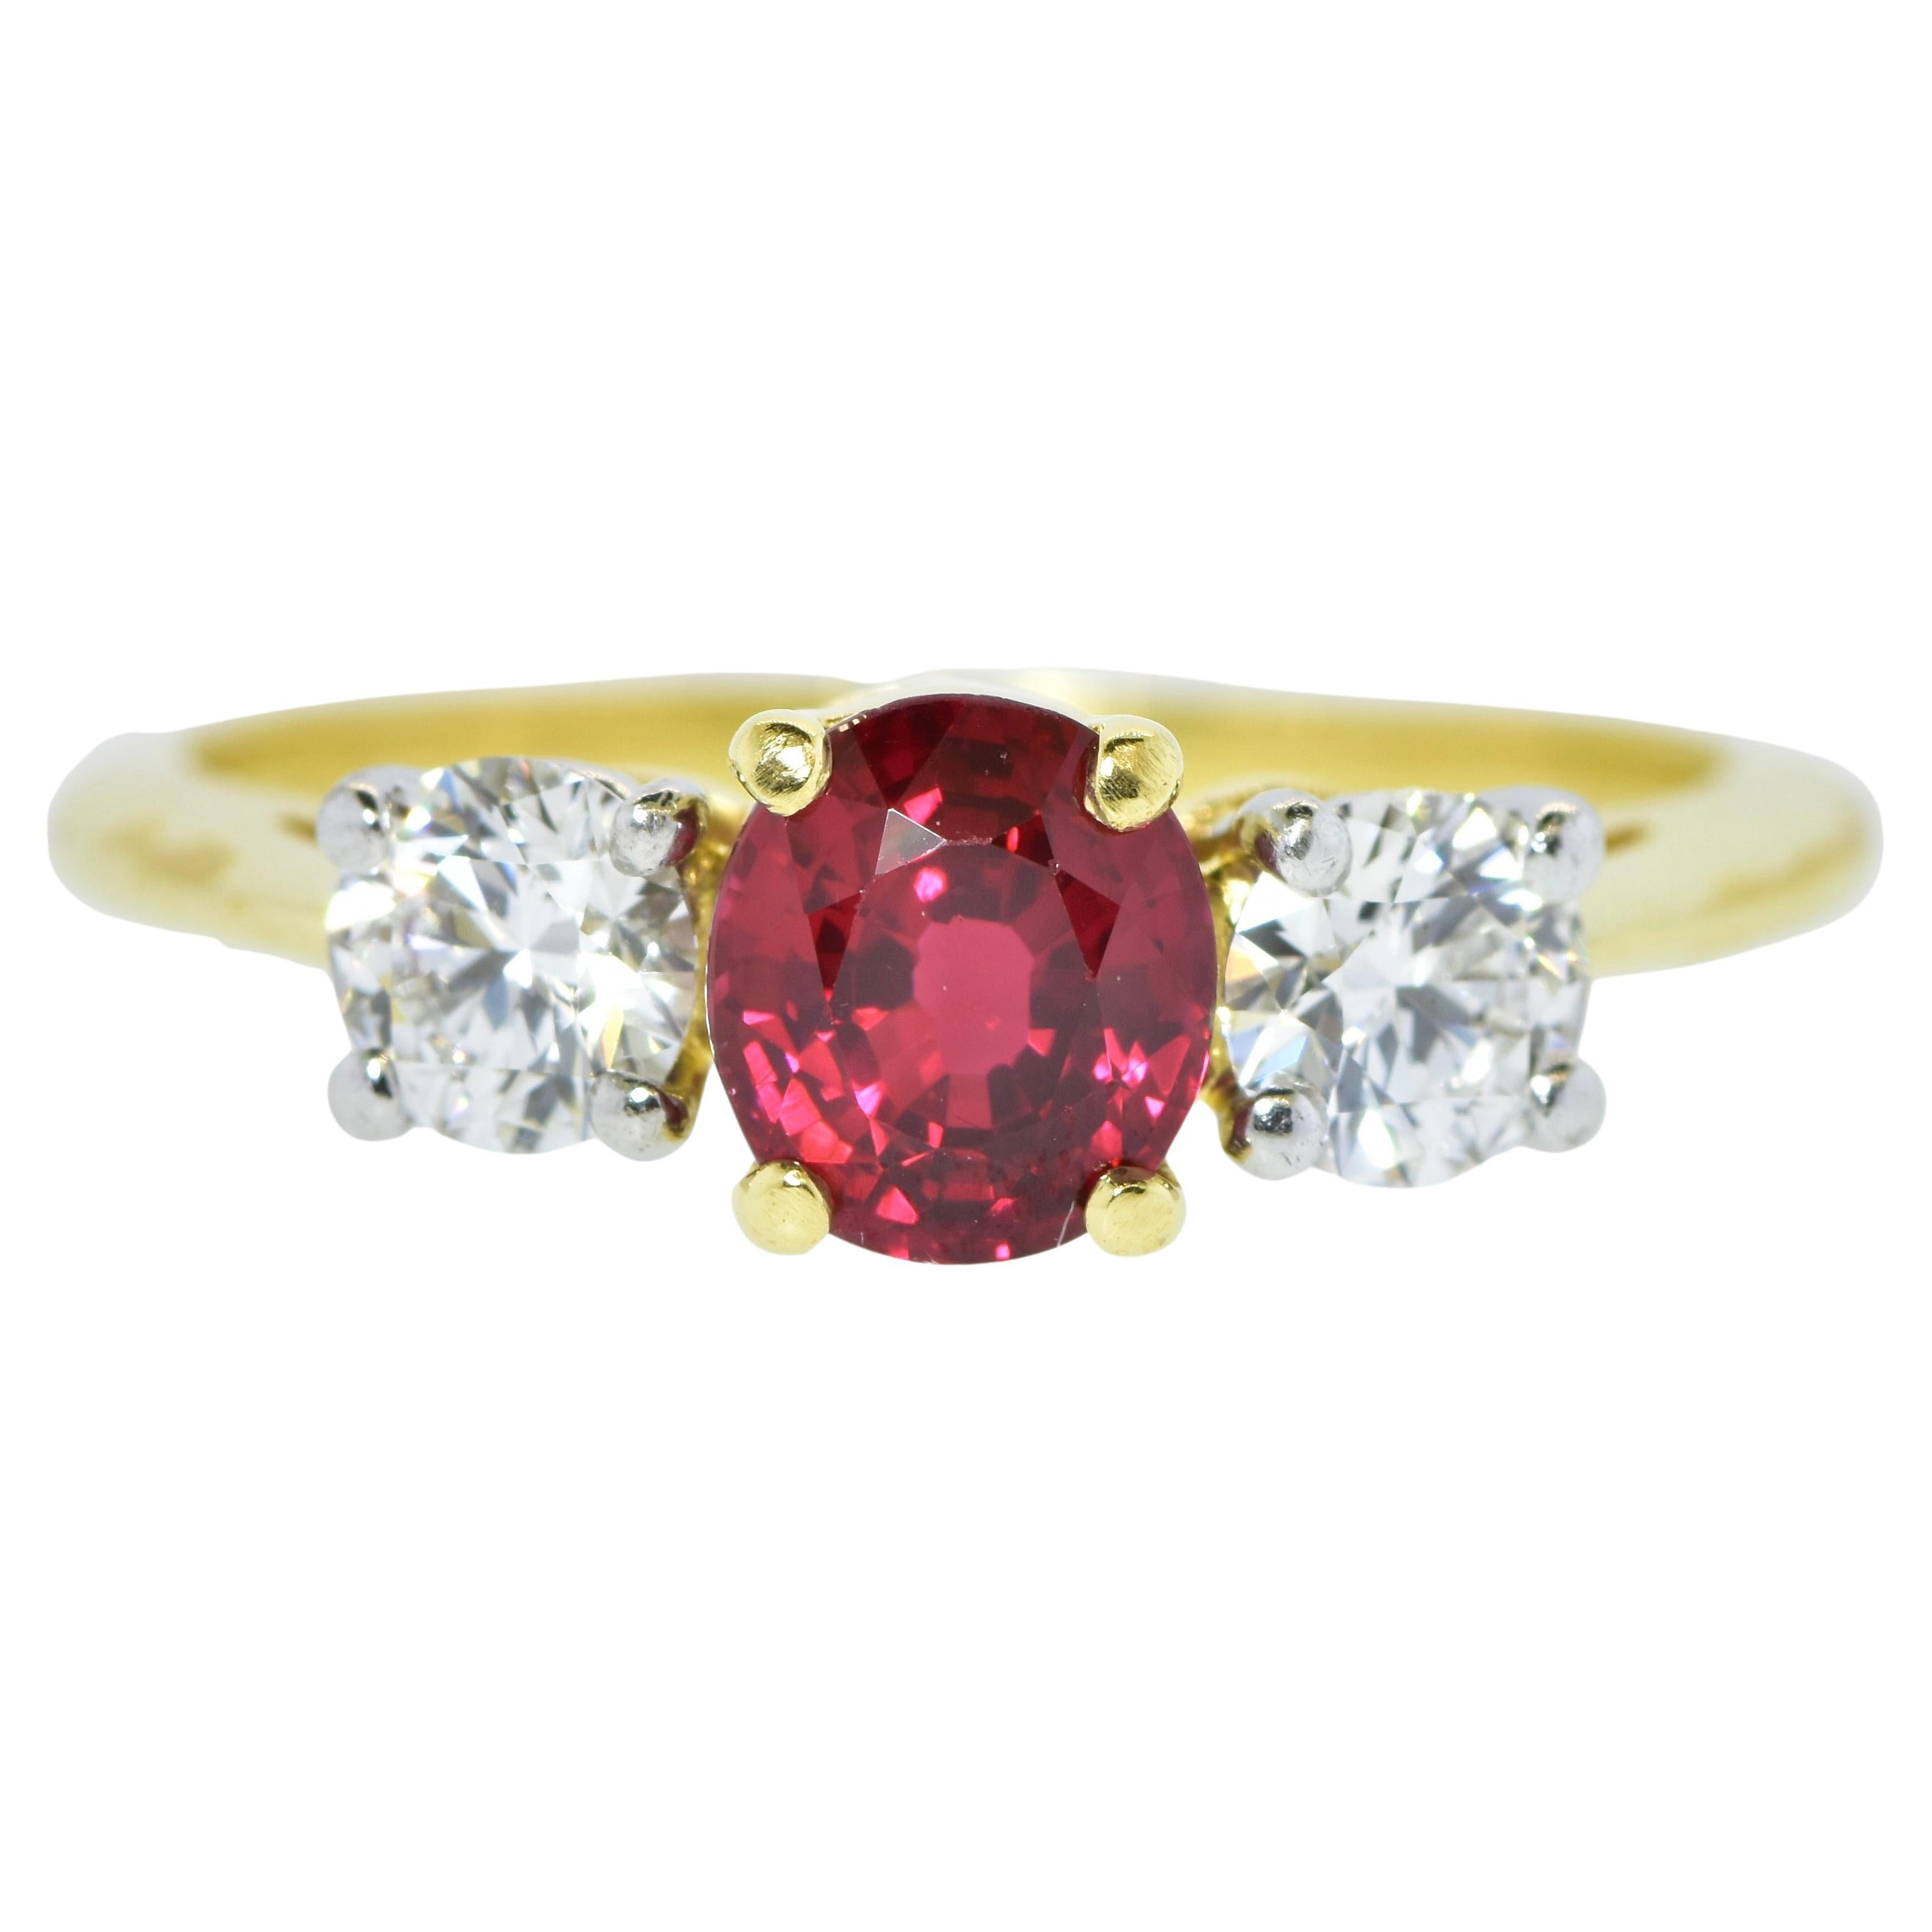 Tiffany & Co. natural Burma ruby and diamond ring.  GIA has examined this ruby and states that it is 